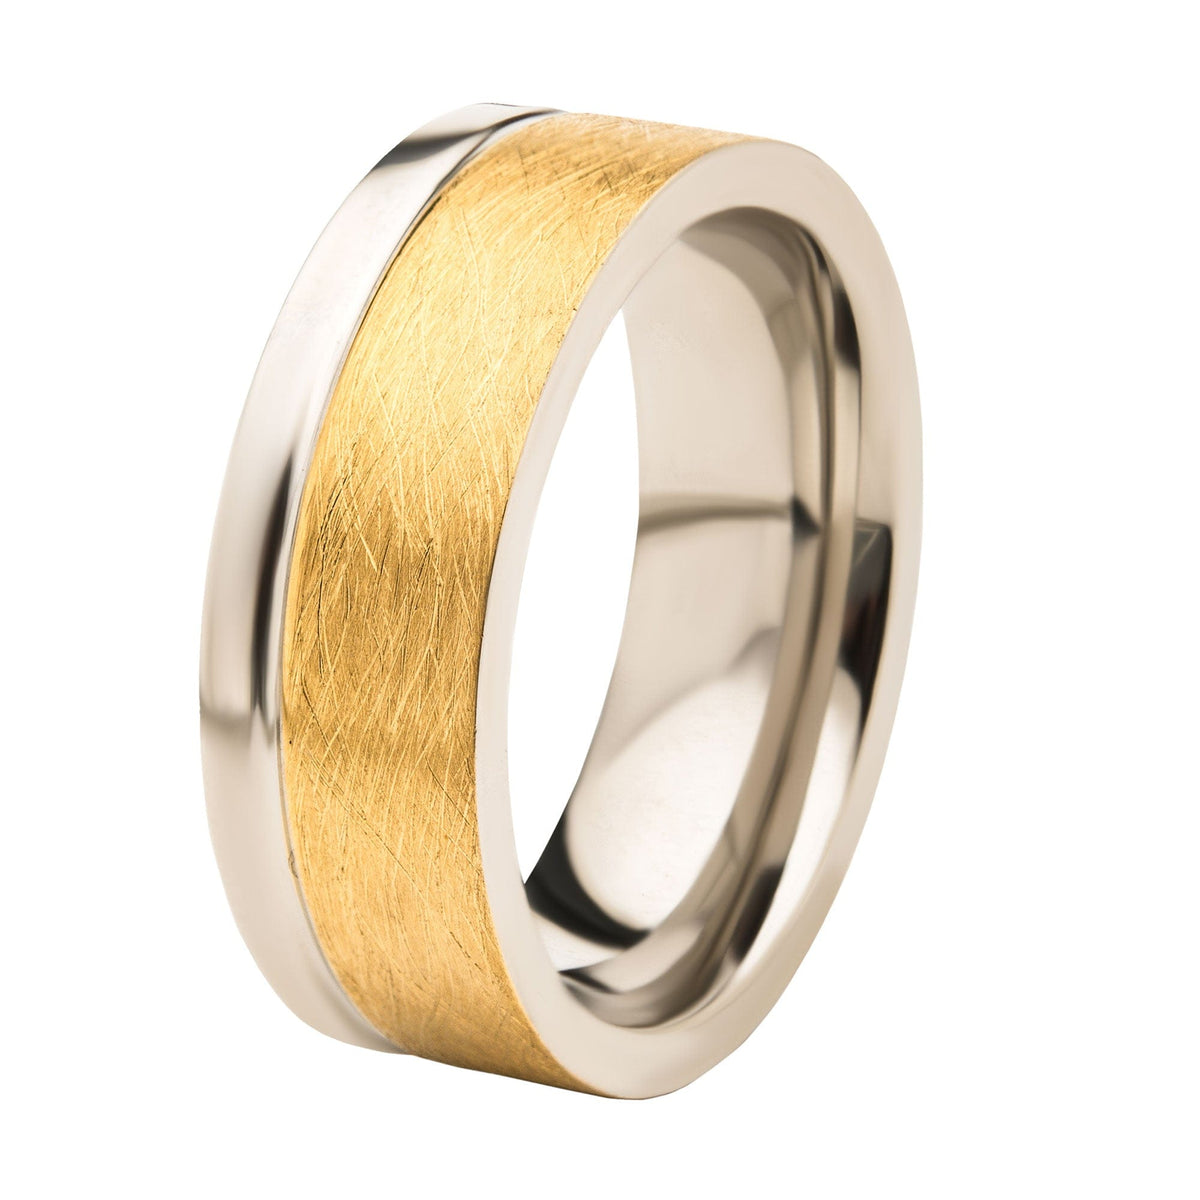 INOX JEWELRY Rings Golden Tone and Silver Tone Stainless Steel Brushed Finish Band Ring